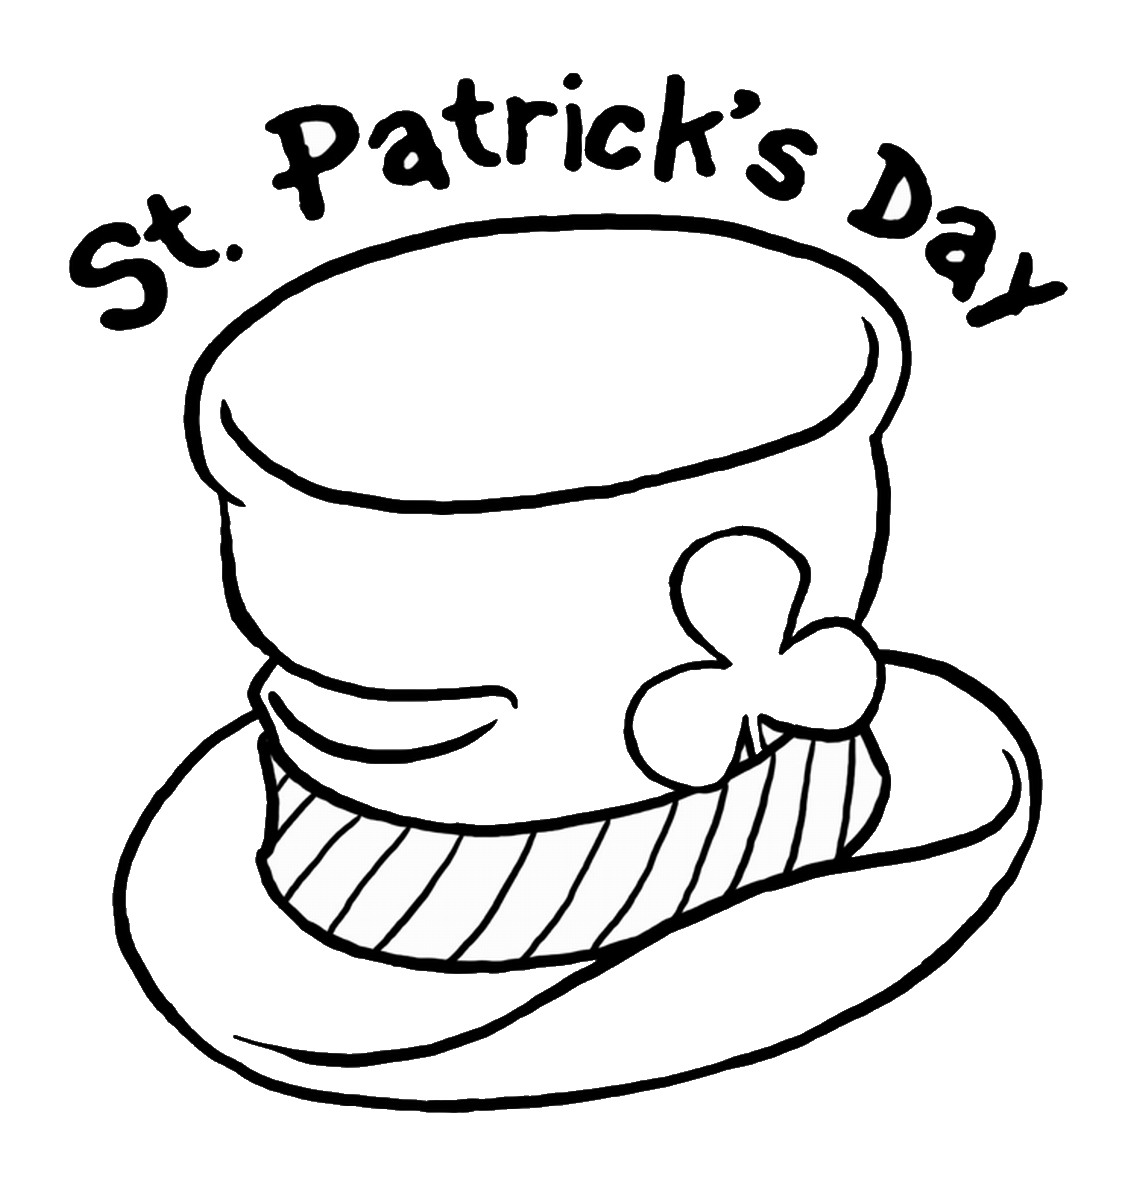 St Patricks Day Coloring Pages - Best Coloring Pages For Kids